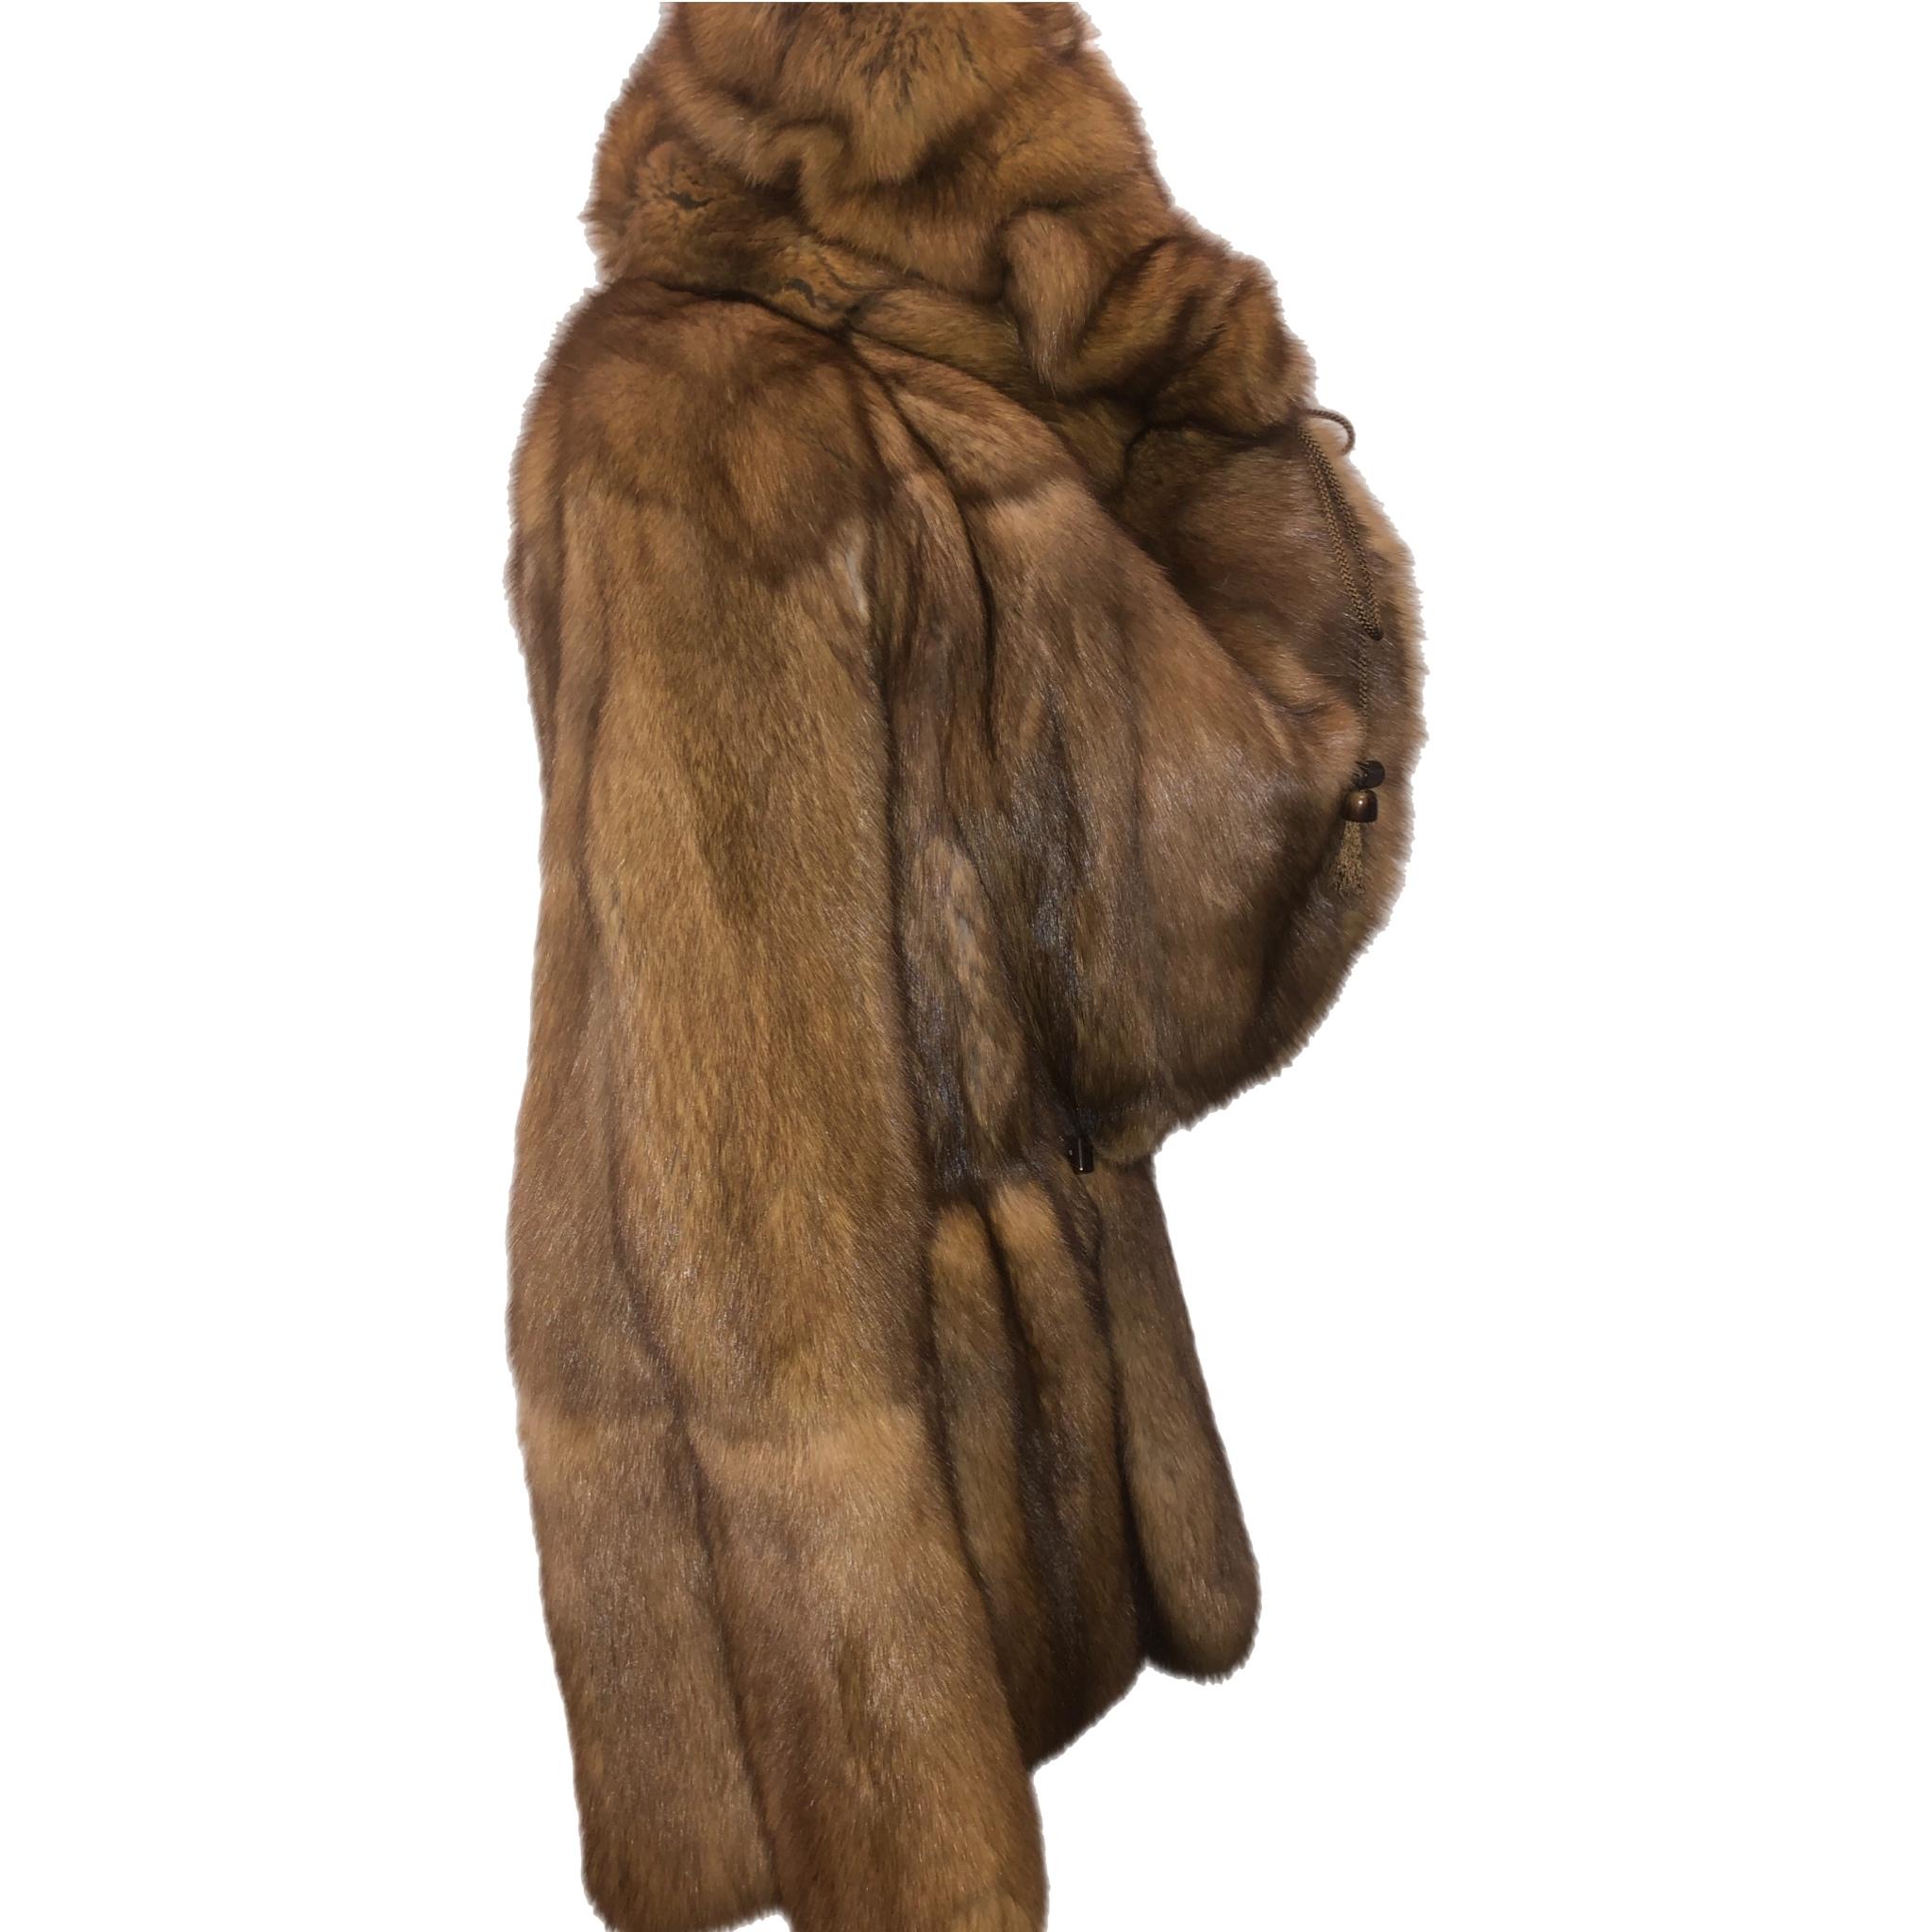 Bisang Russian Sable fur coat size 14-16 tags 65000$ For Sale 7